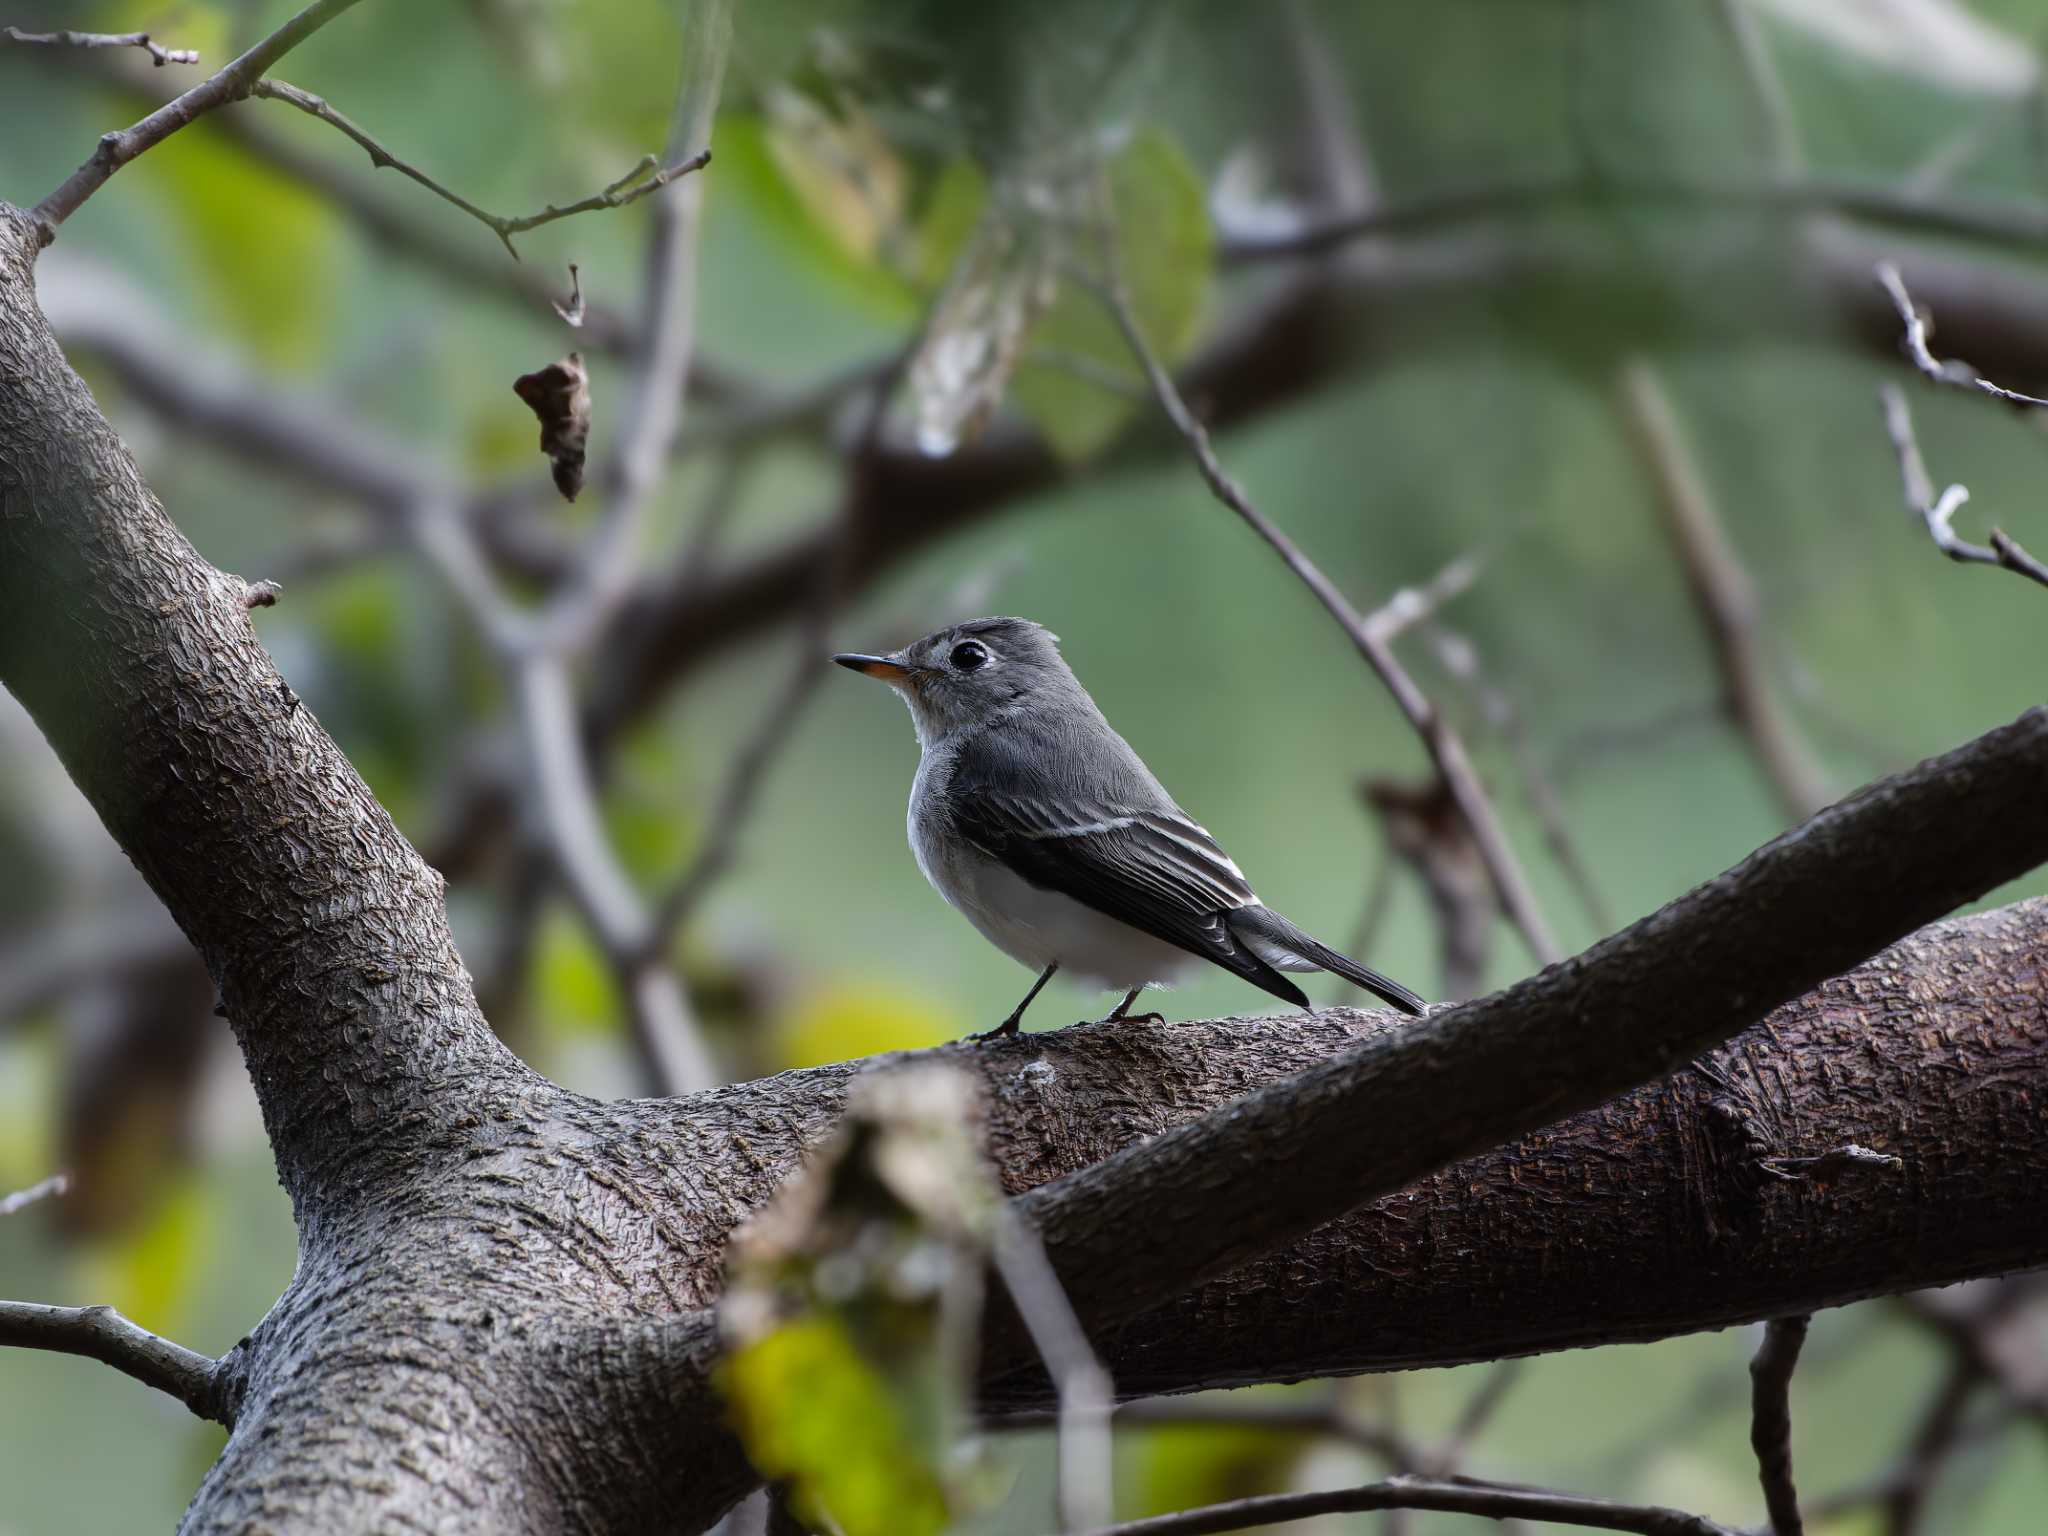 Photo of Asian Brown Flycatcher at 長崎県 by ここは長崎